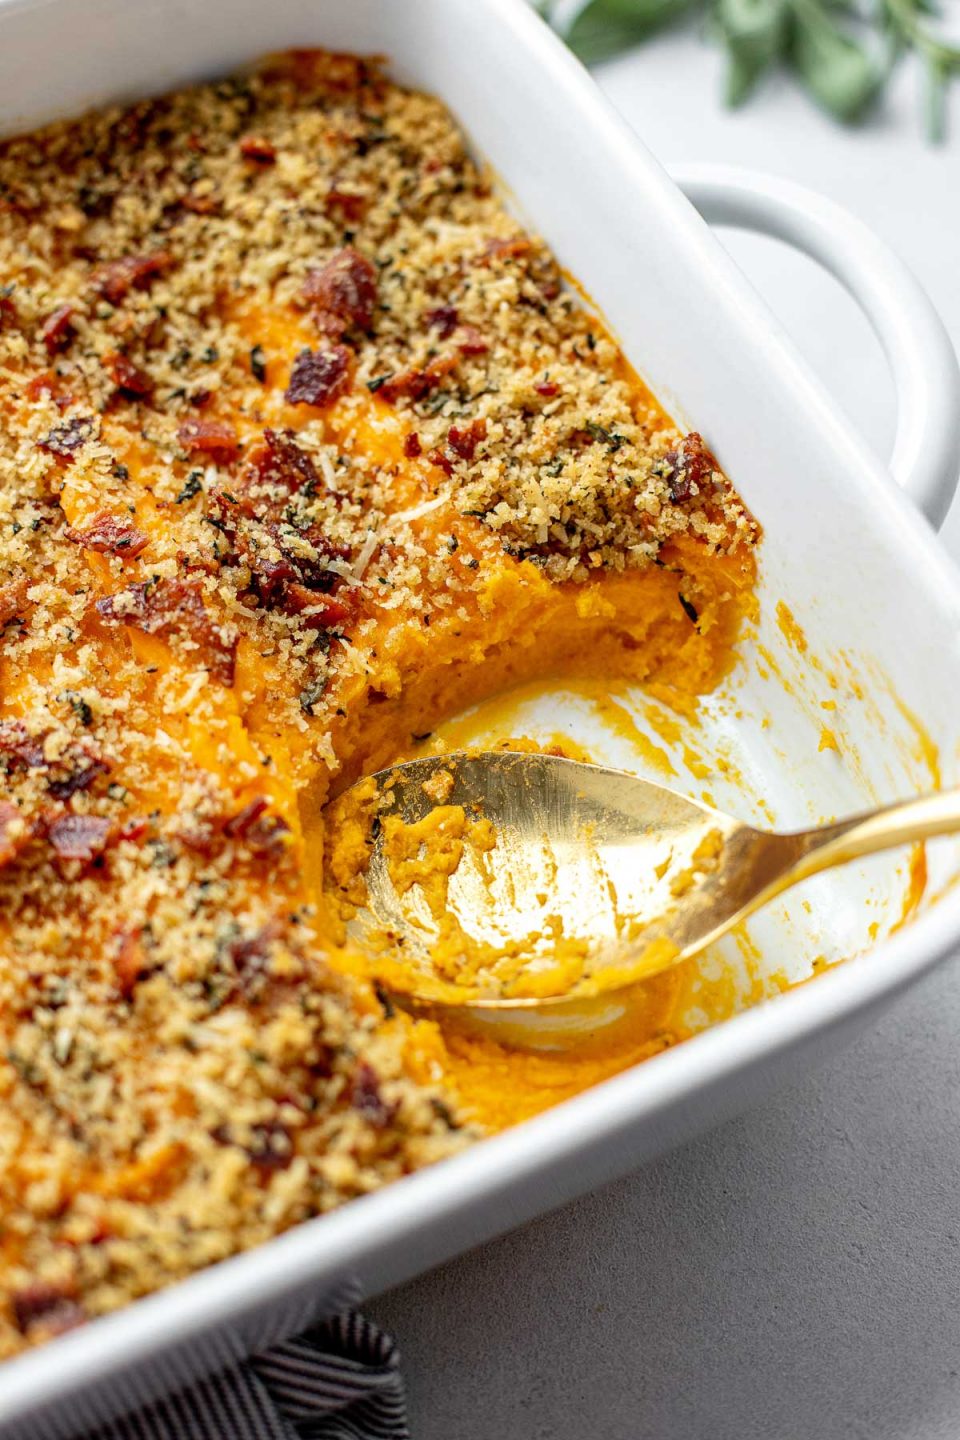 A side angle shot of a white baking dish filled with assembled and baked Savory Sweet Potato Casserole topped with bacon breadcrumb topping. A spoon rests inside of the baking dish with a portion of the casserole scooped out. The baking dish sits atop a creamy white textured surface. A gray and white striped linen napkin is tucked underneath the baking dish. A few loose fresh herbs surround the baking dish in the background.